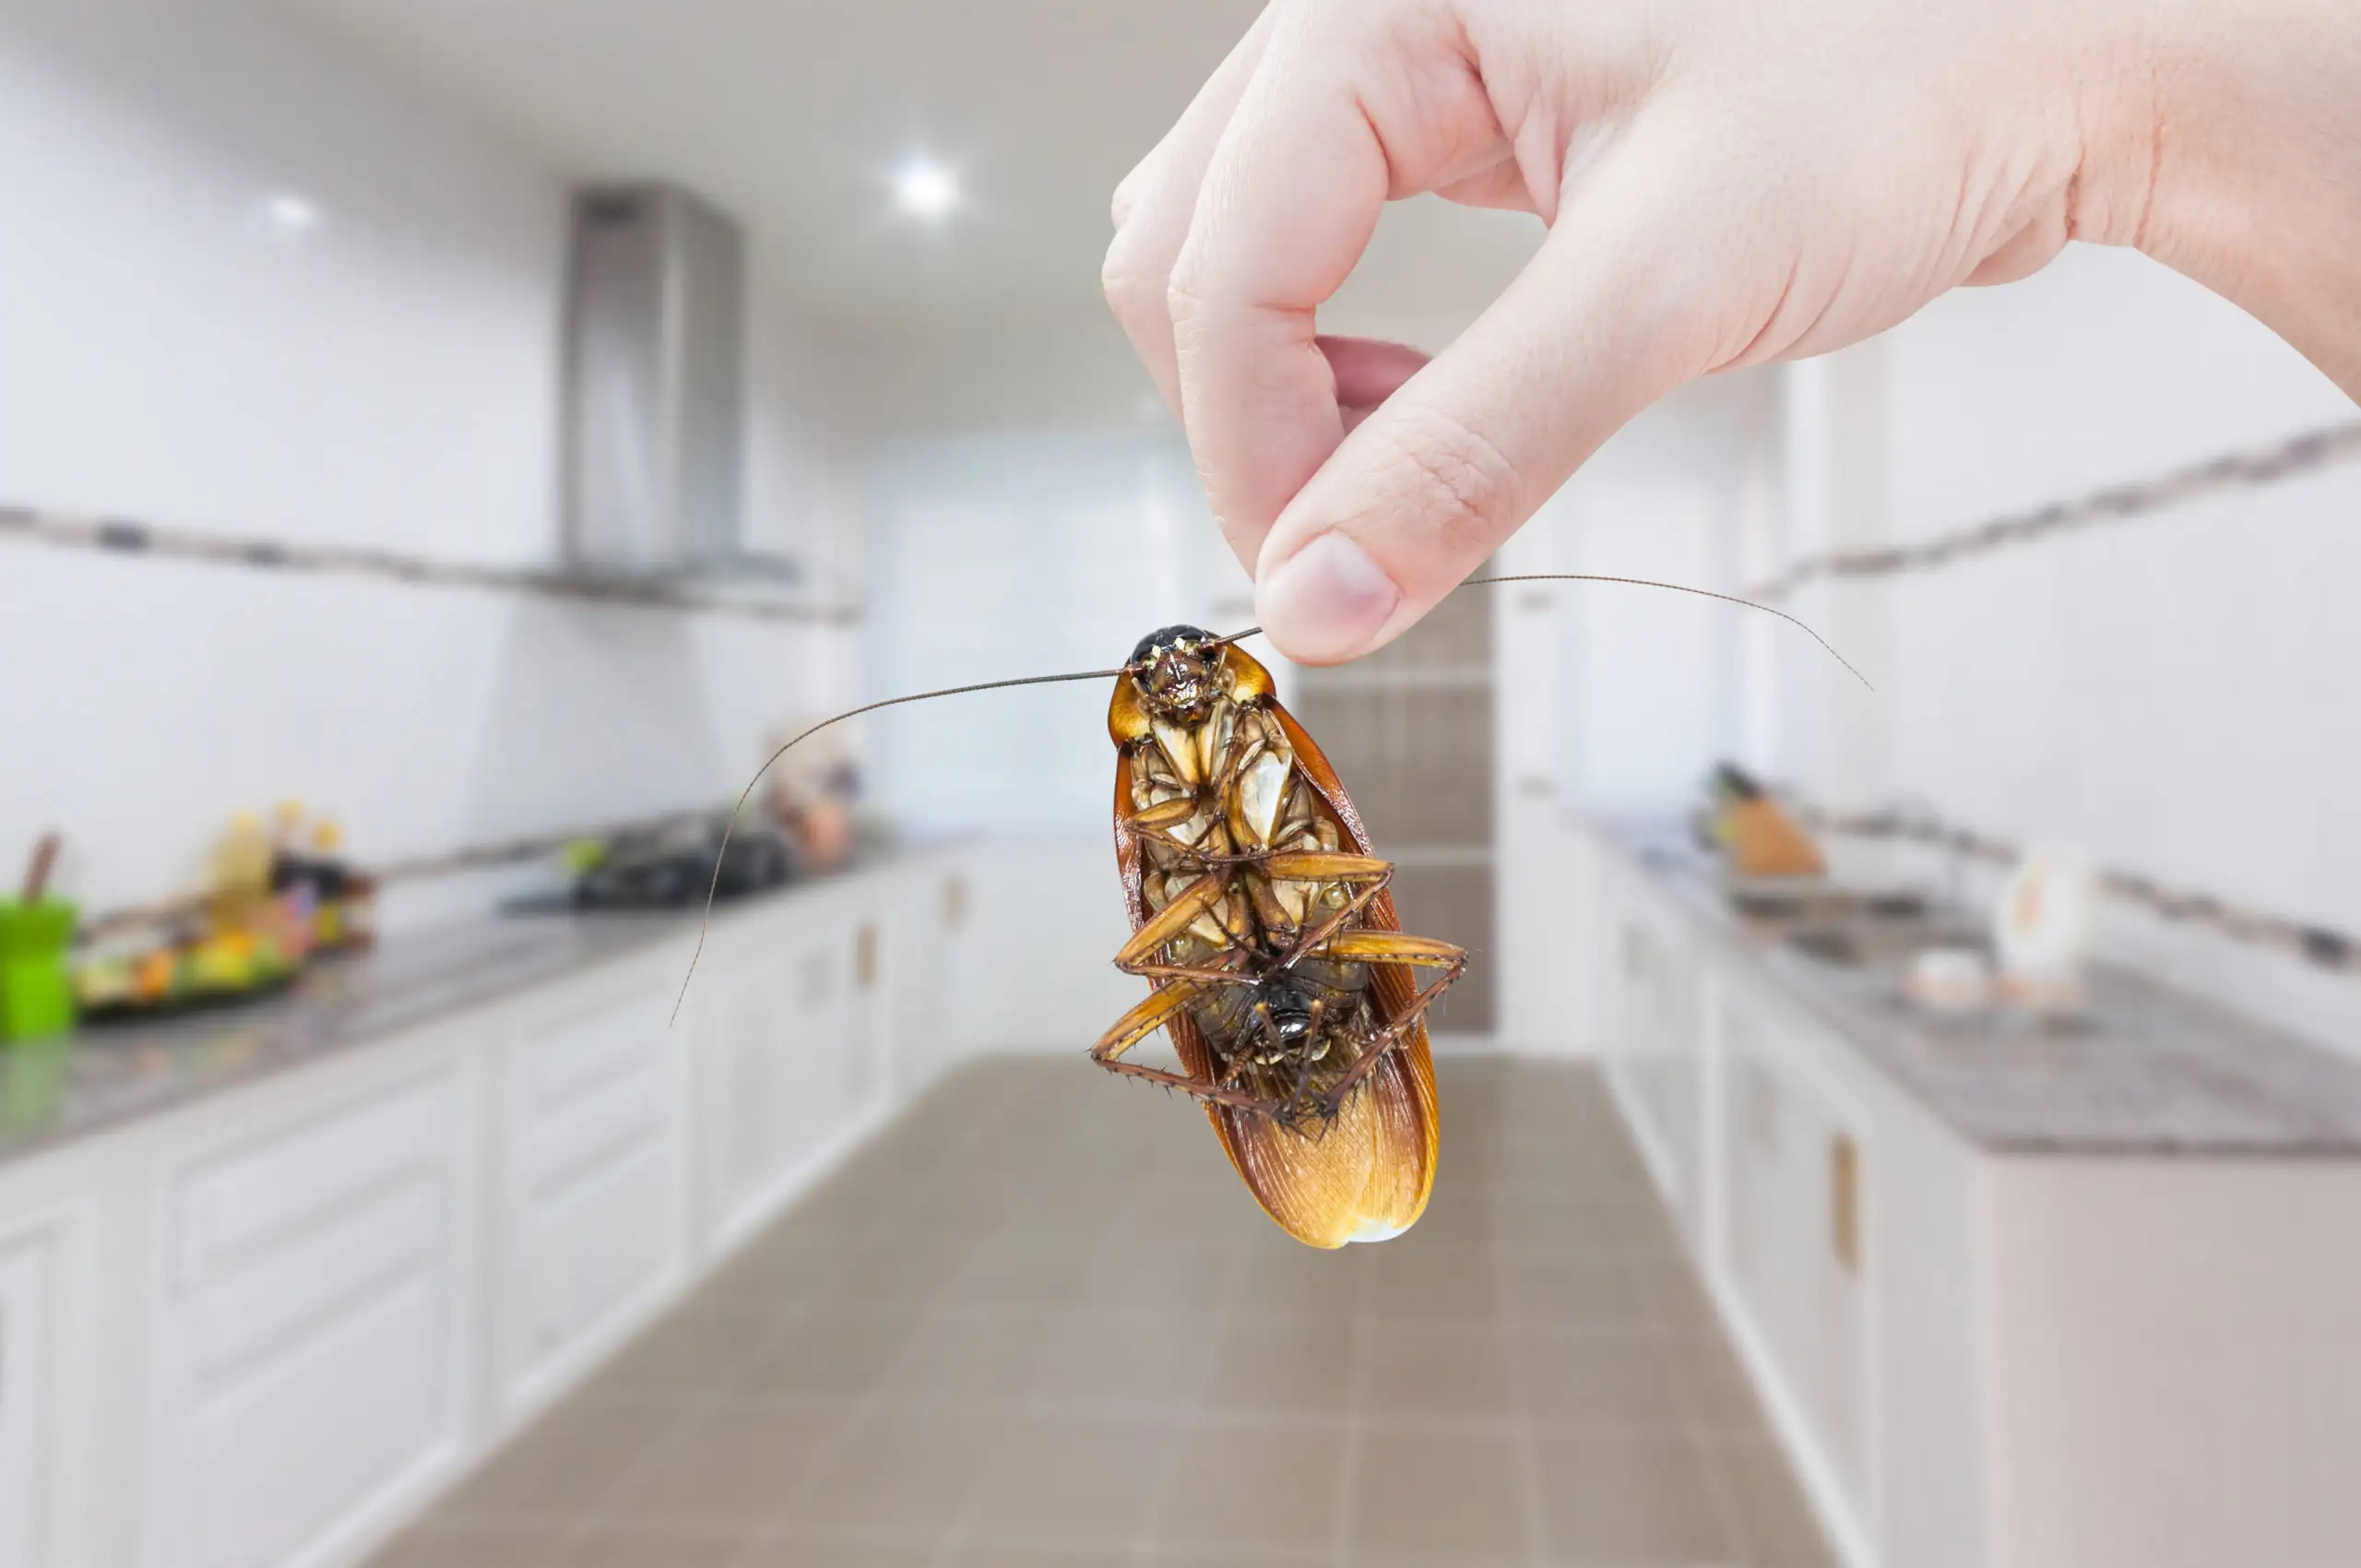 Hand holding up a dead cockroach - keep pests away from your home with Arrow Exterminating Company in NY